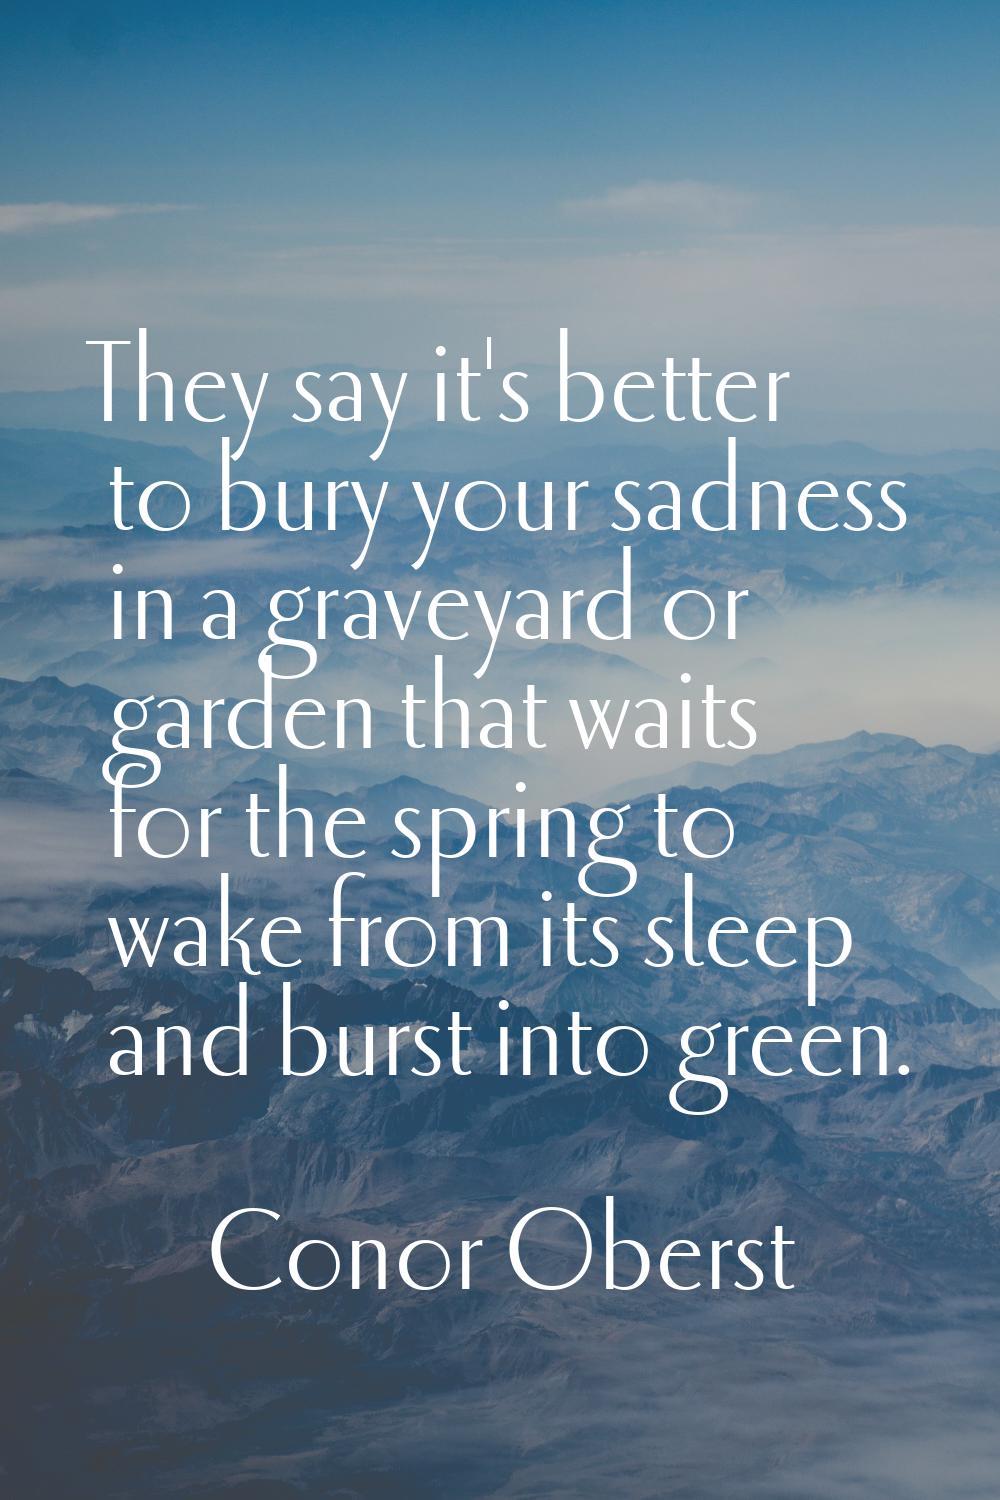 They say it's better to bury your sadness in a graveyard or garden that waits for the spring to wak